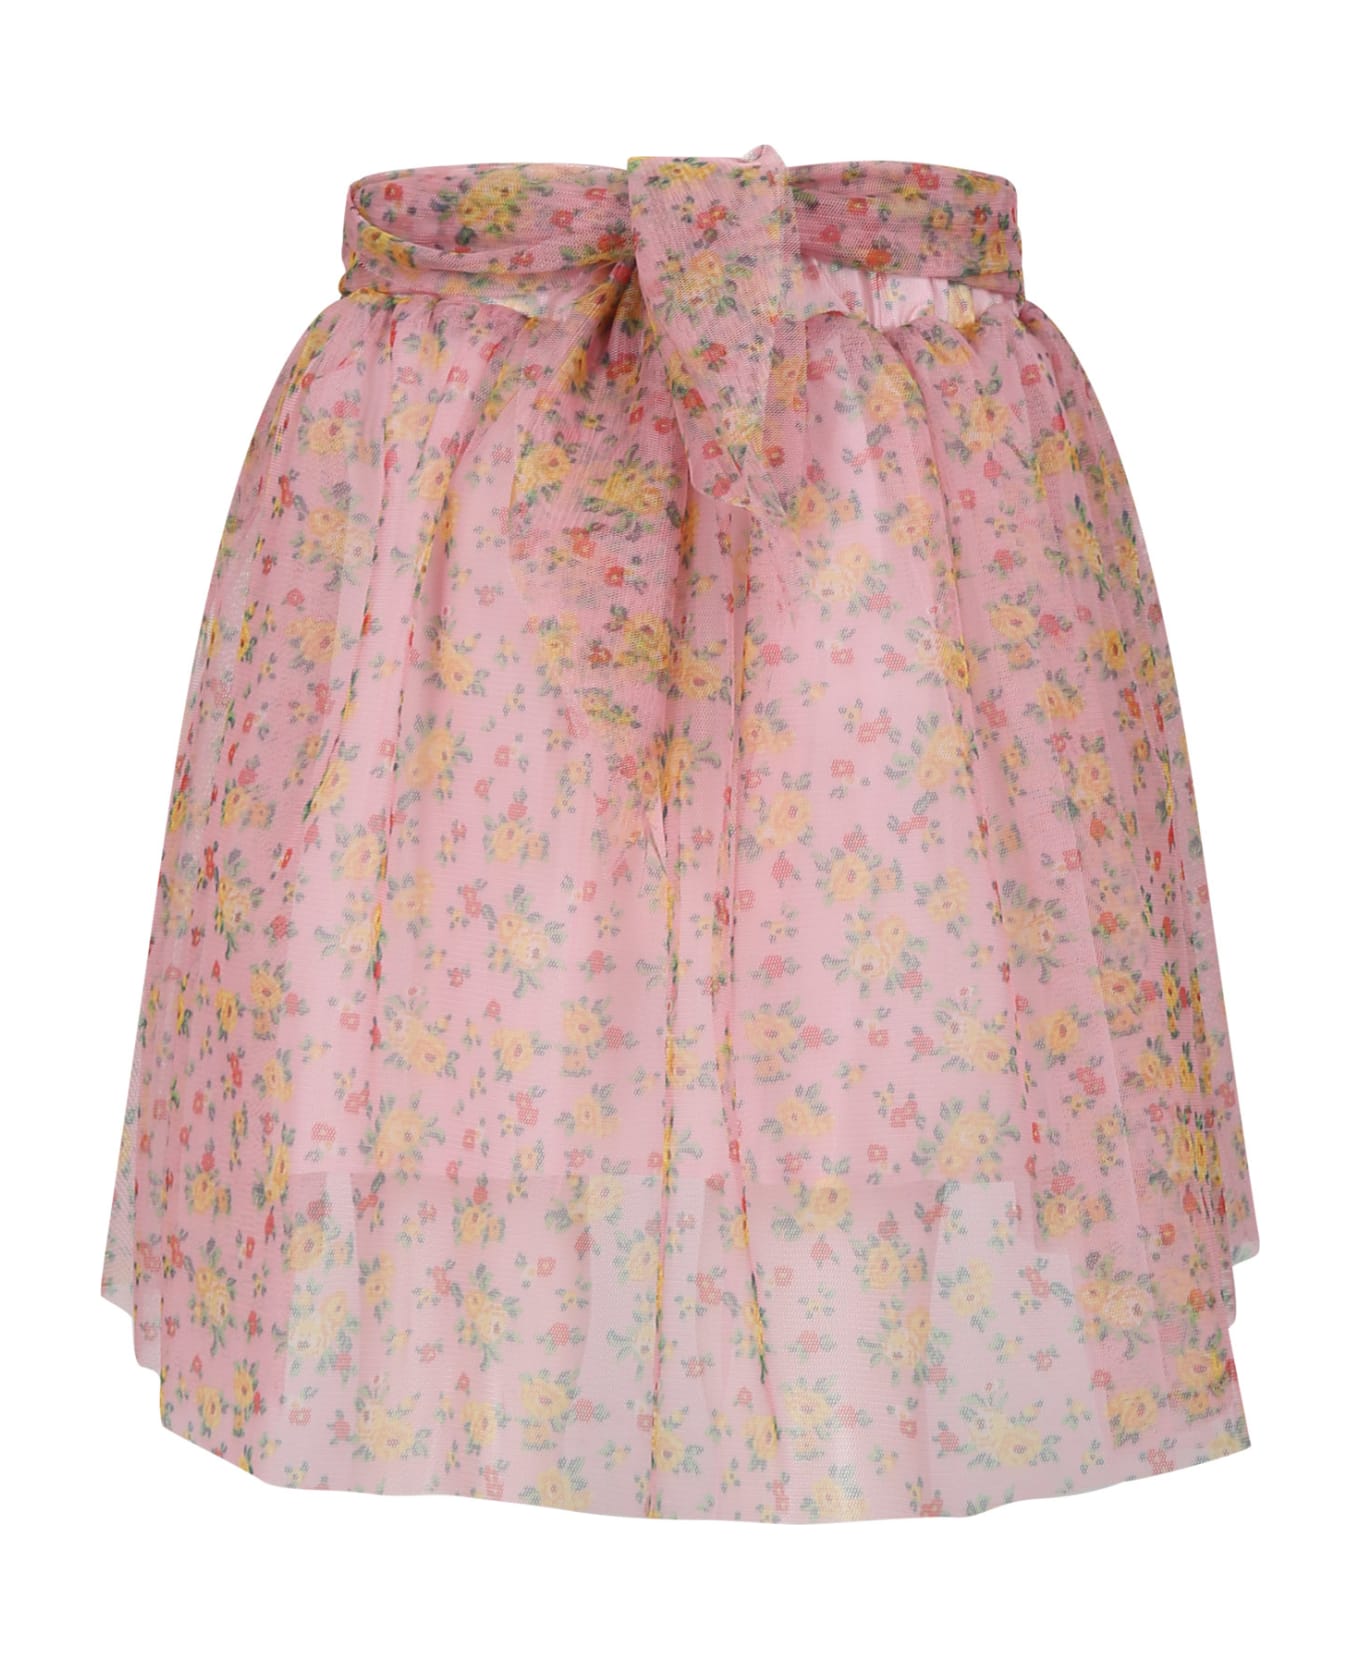 Philosophy di Lorenzo Serafini Kids Pink Skirt For Girl With Floral Print - Multicolor ボトムス